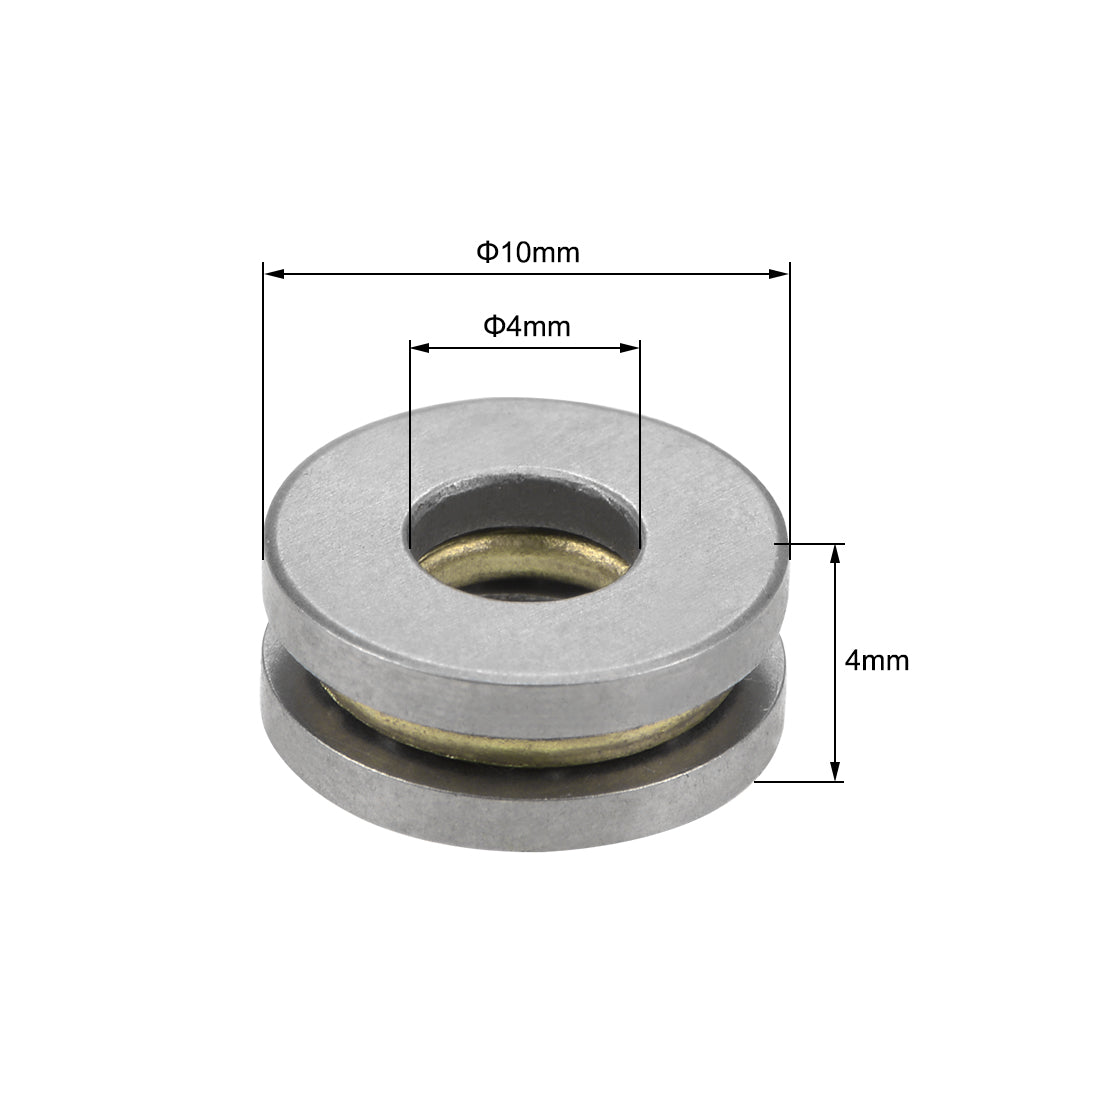 uxcell Uxcell F4-10M Miniature Thrust Ball Bearing 4x10x4mm Chrome Steel with Washer 2Pcs